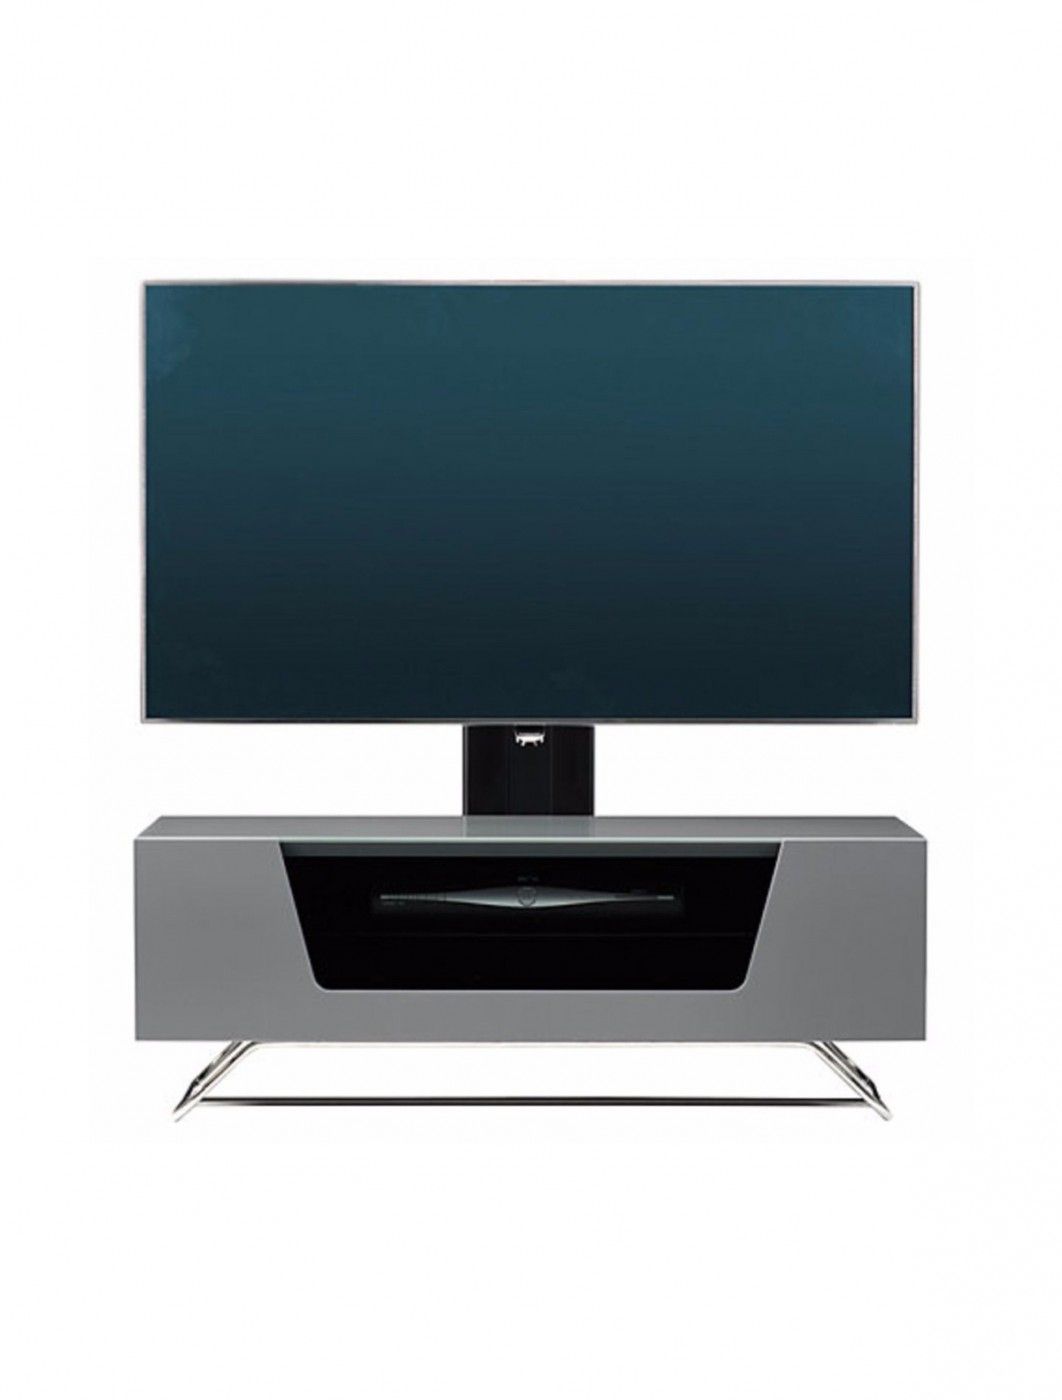 Alphason Chromium Cantilever Tv Stand Cro2 1200bkt Gr With Chromium Tv Stands (View 2 of 15)